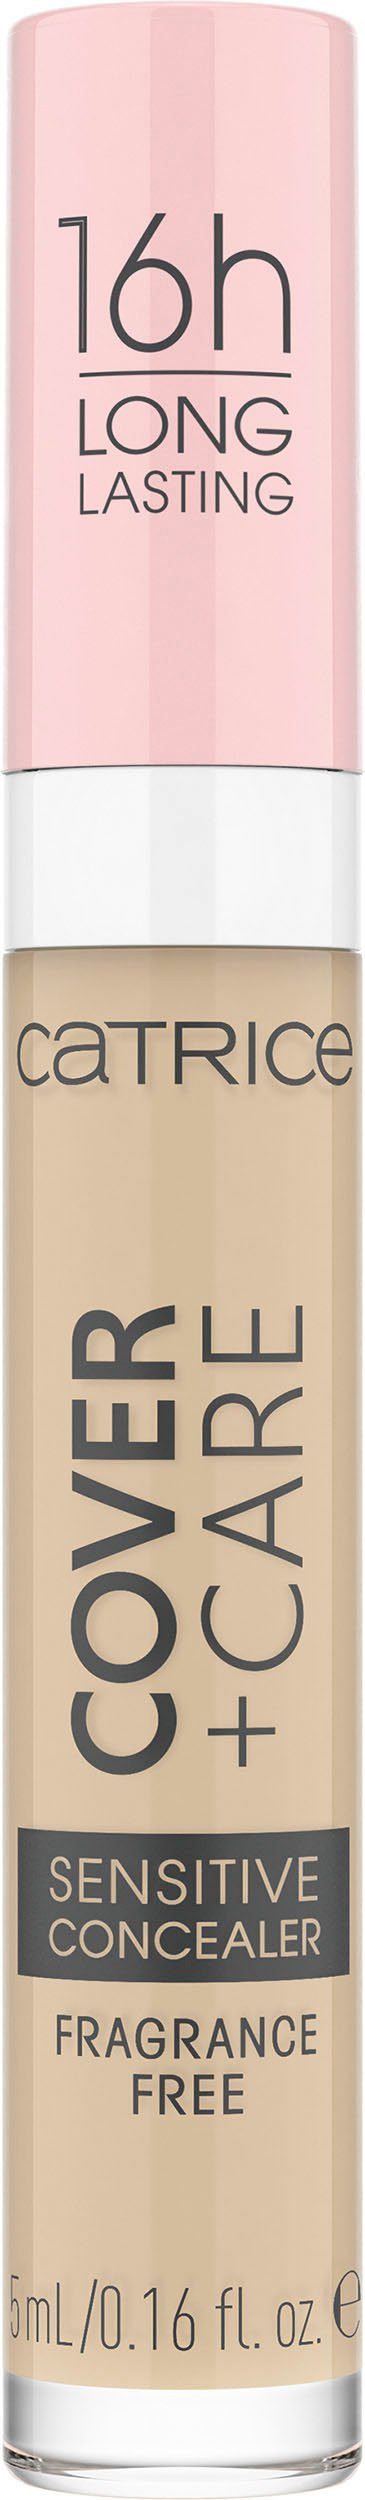 Catrice Concealer Catrice + Care 3-tlg. 002N Concealer, Sensitive Cover nude